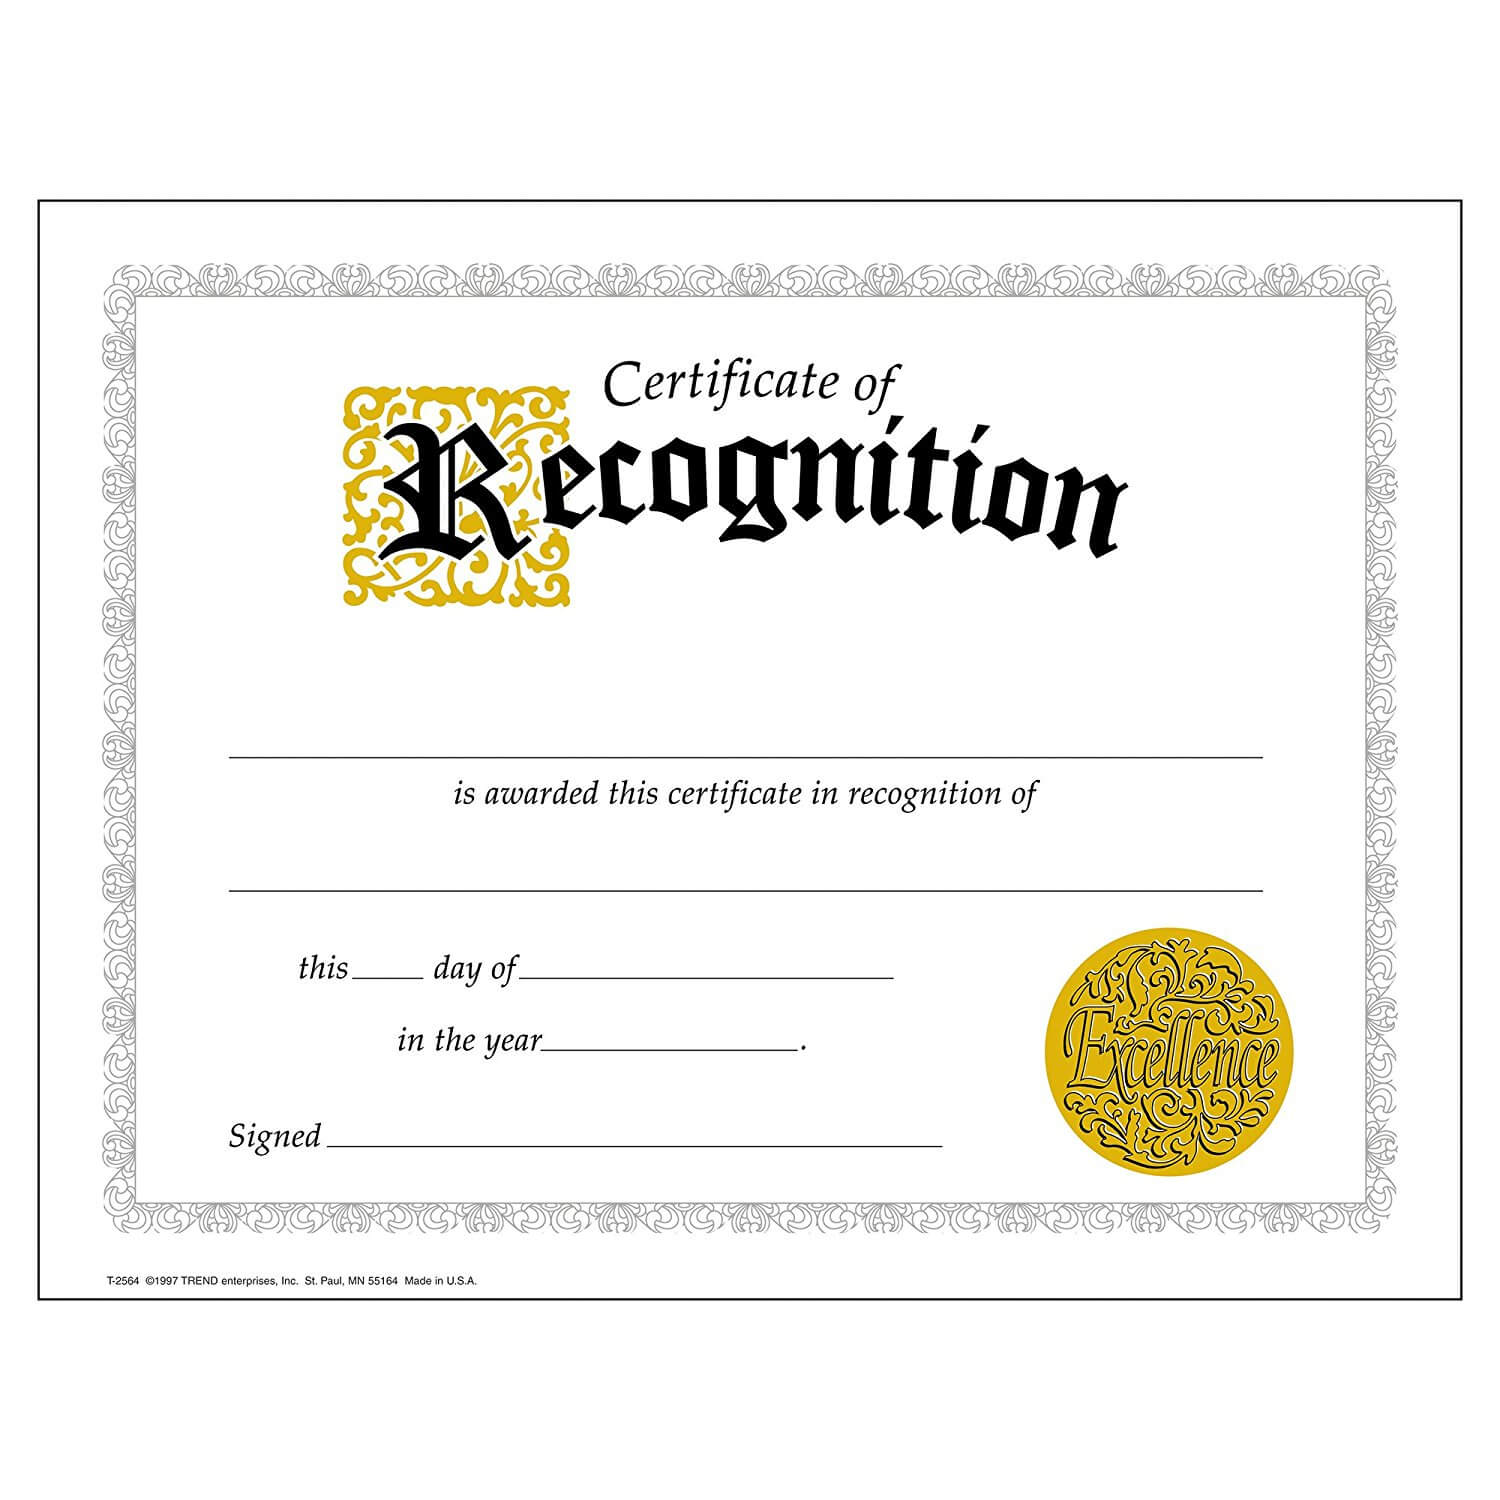 006 Certificate Of Recognition Template Word Ndash Elsik Inside Certificate Of Recognition Word Template